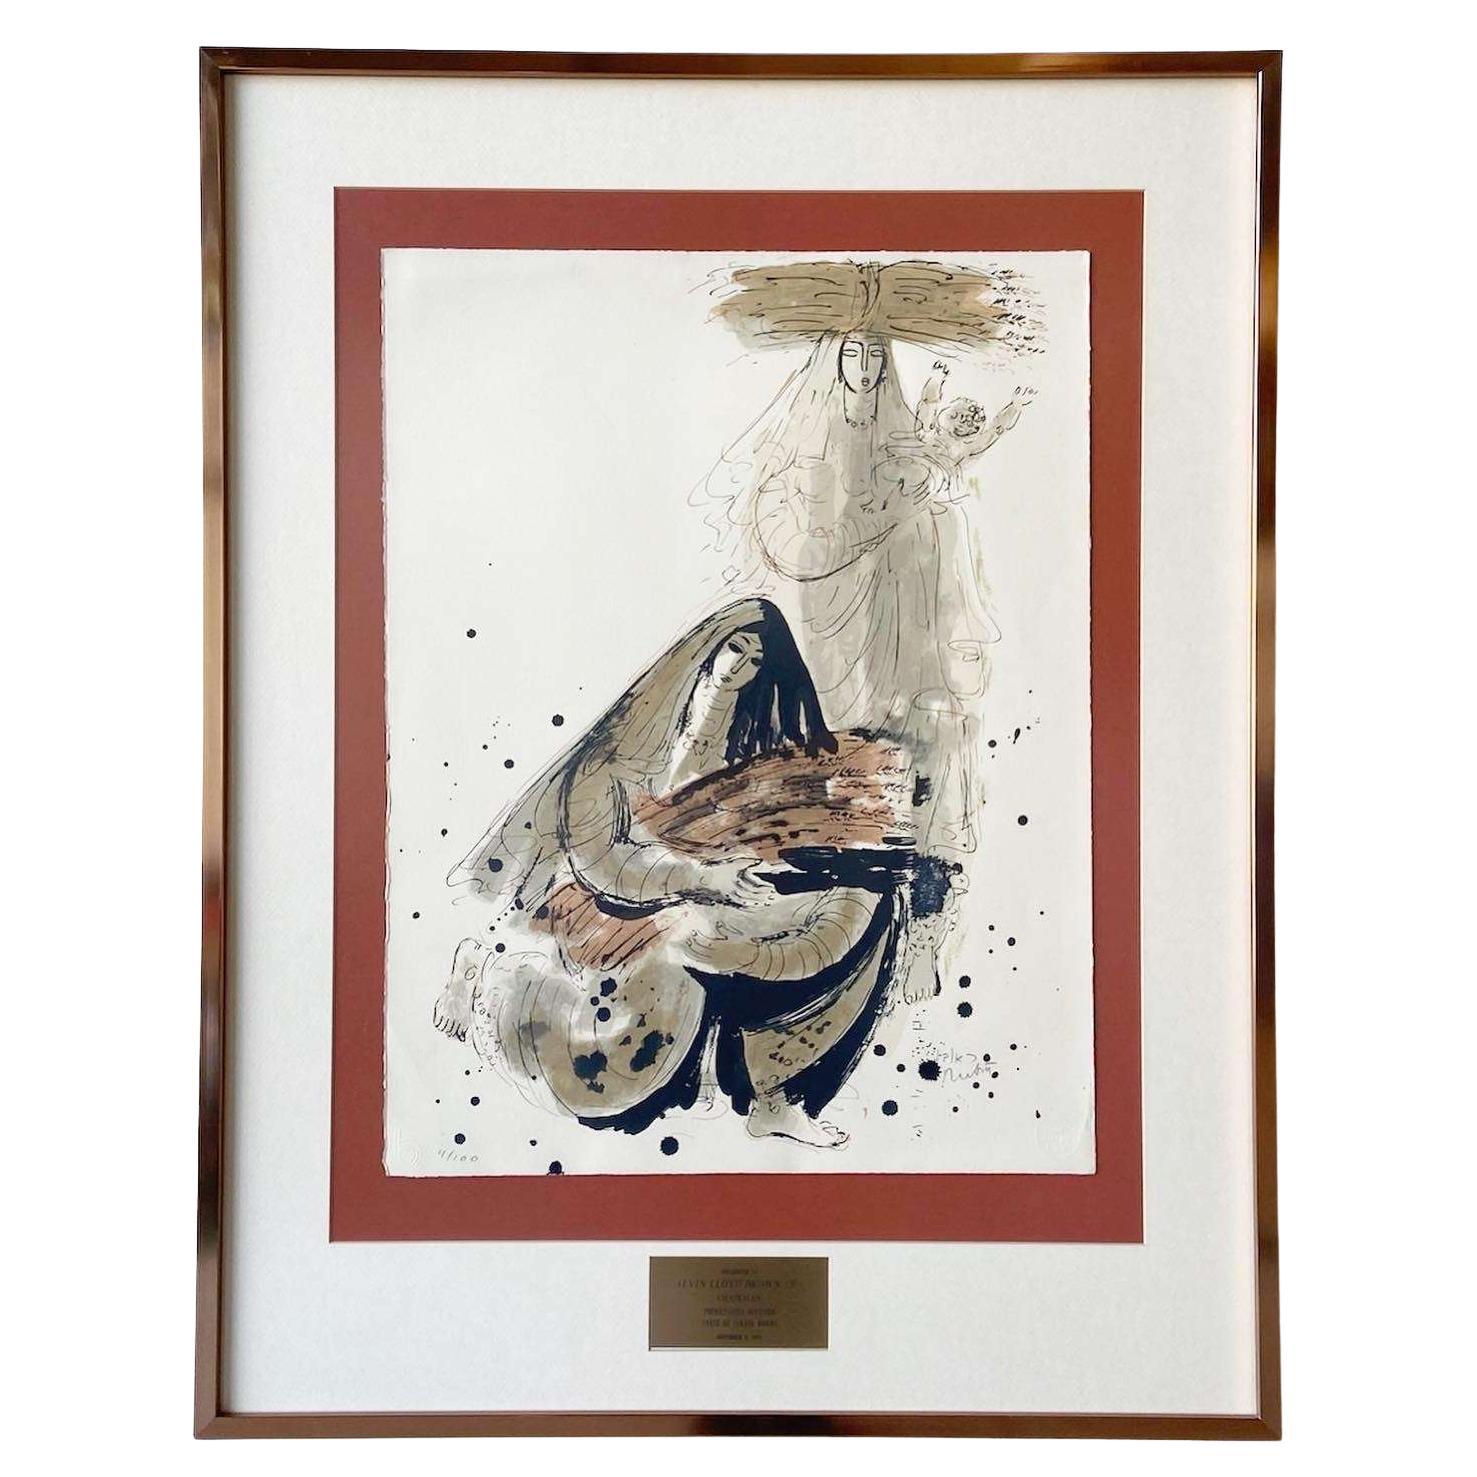 Framed Signed Lithograph “Two Women and a Child” by Reuven Rubin For Sale